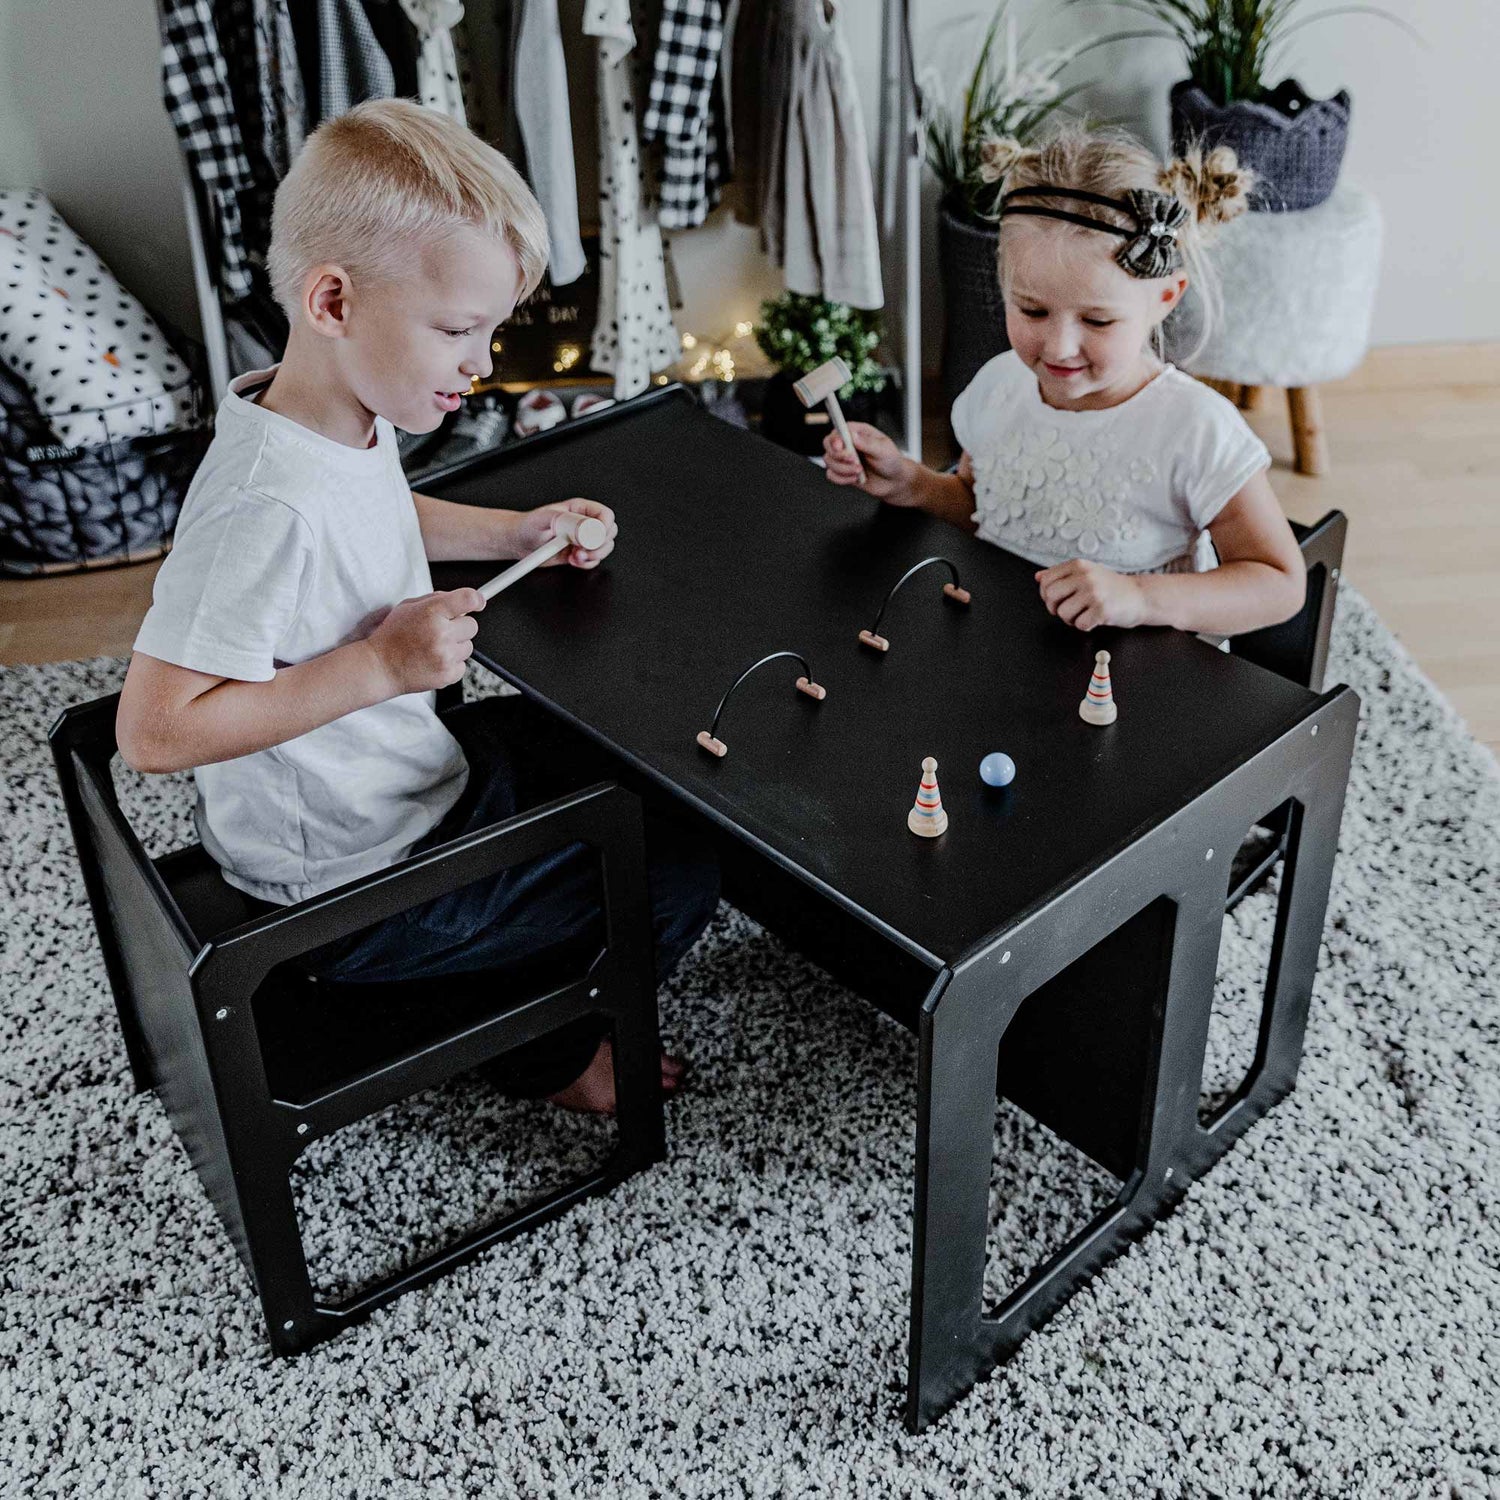 Two children playing at a table in a living room.